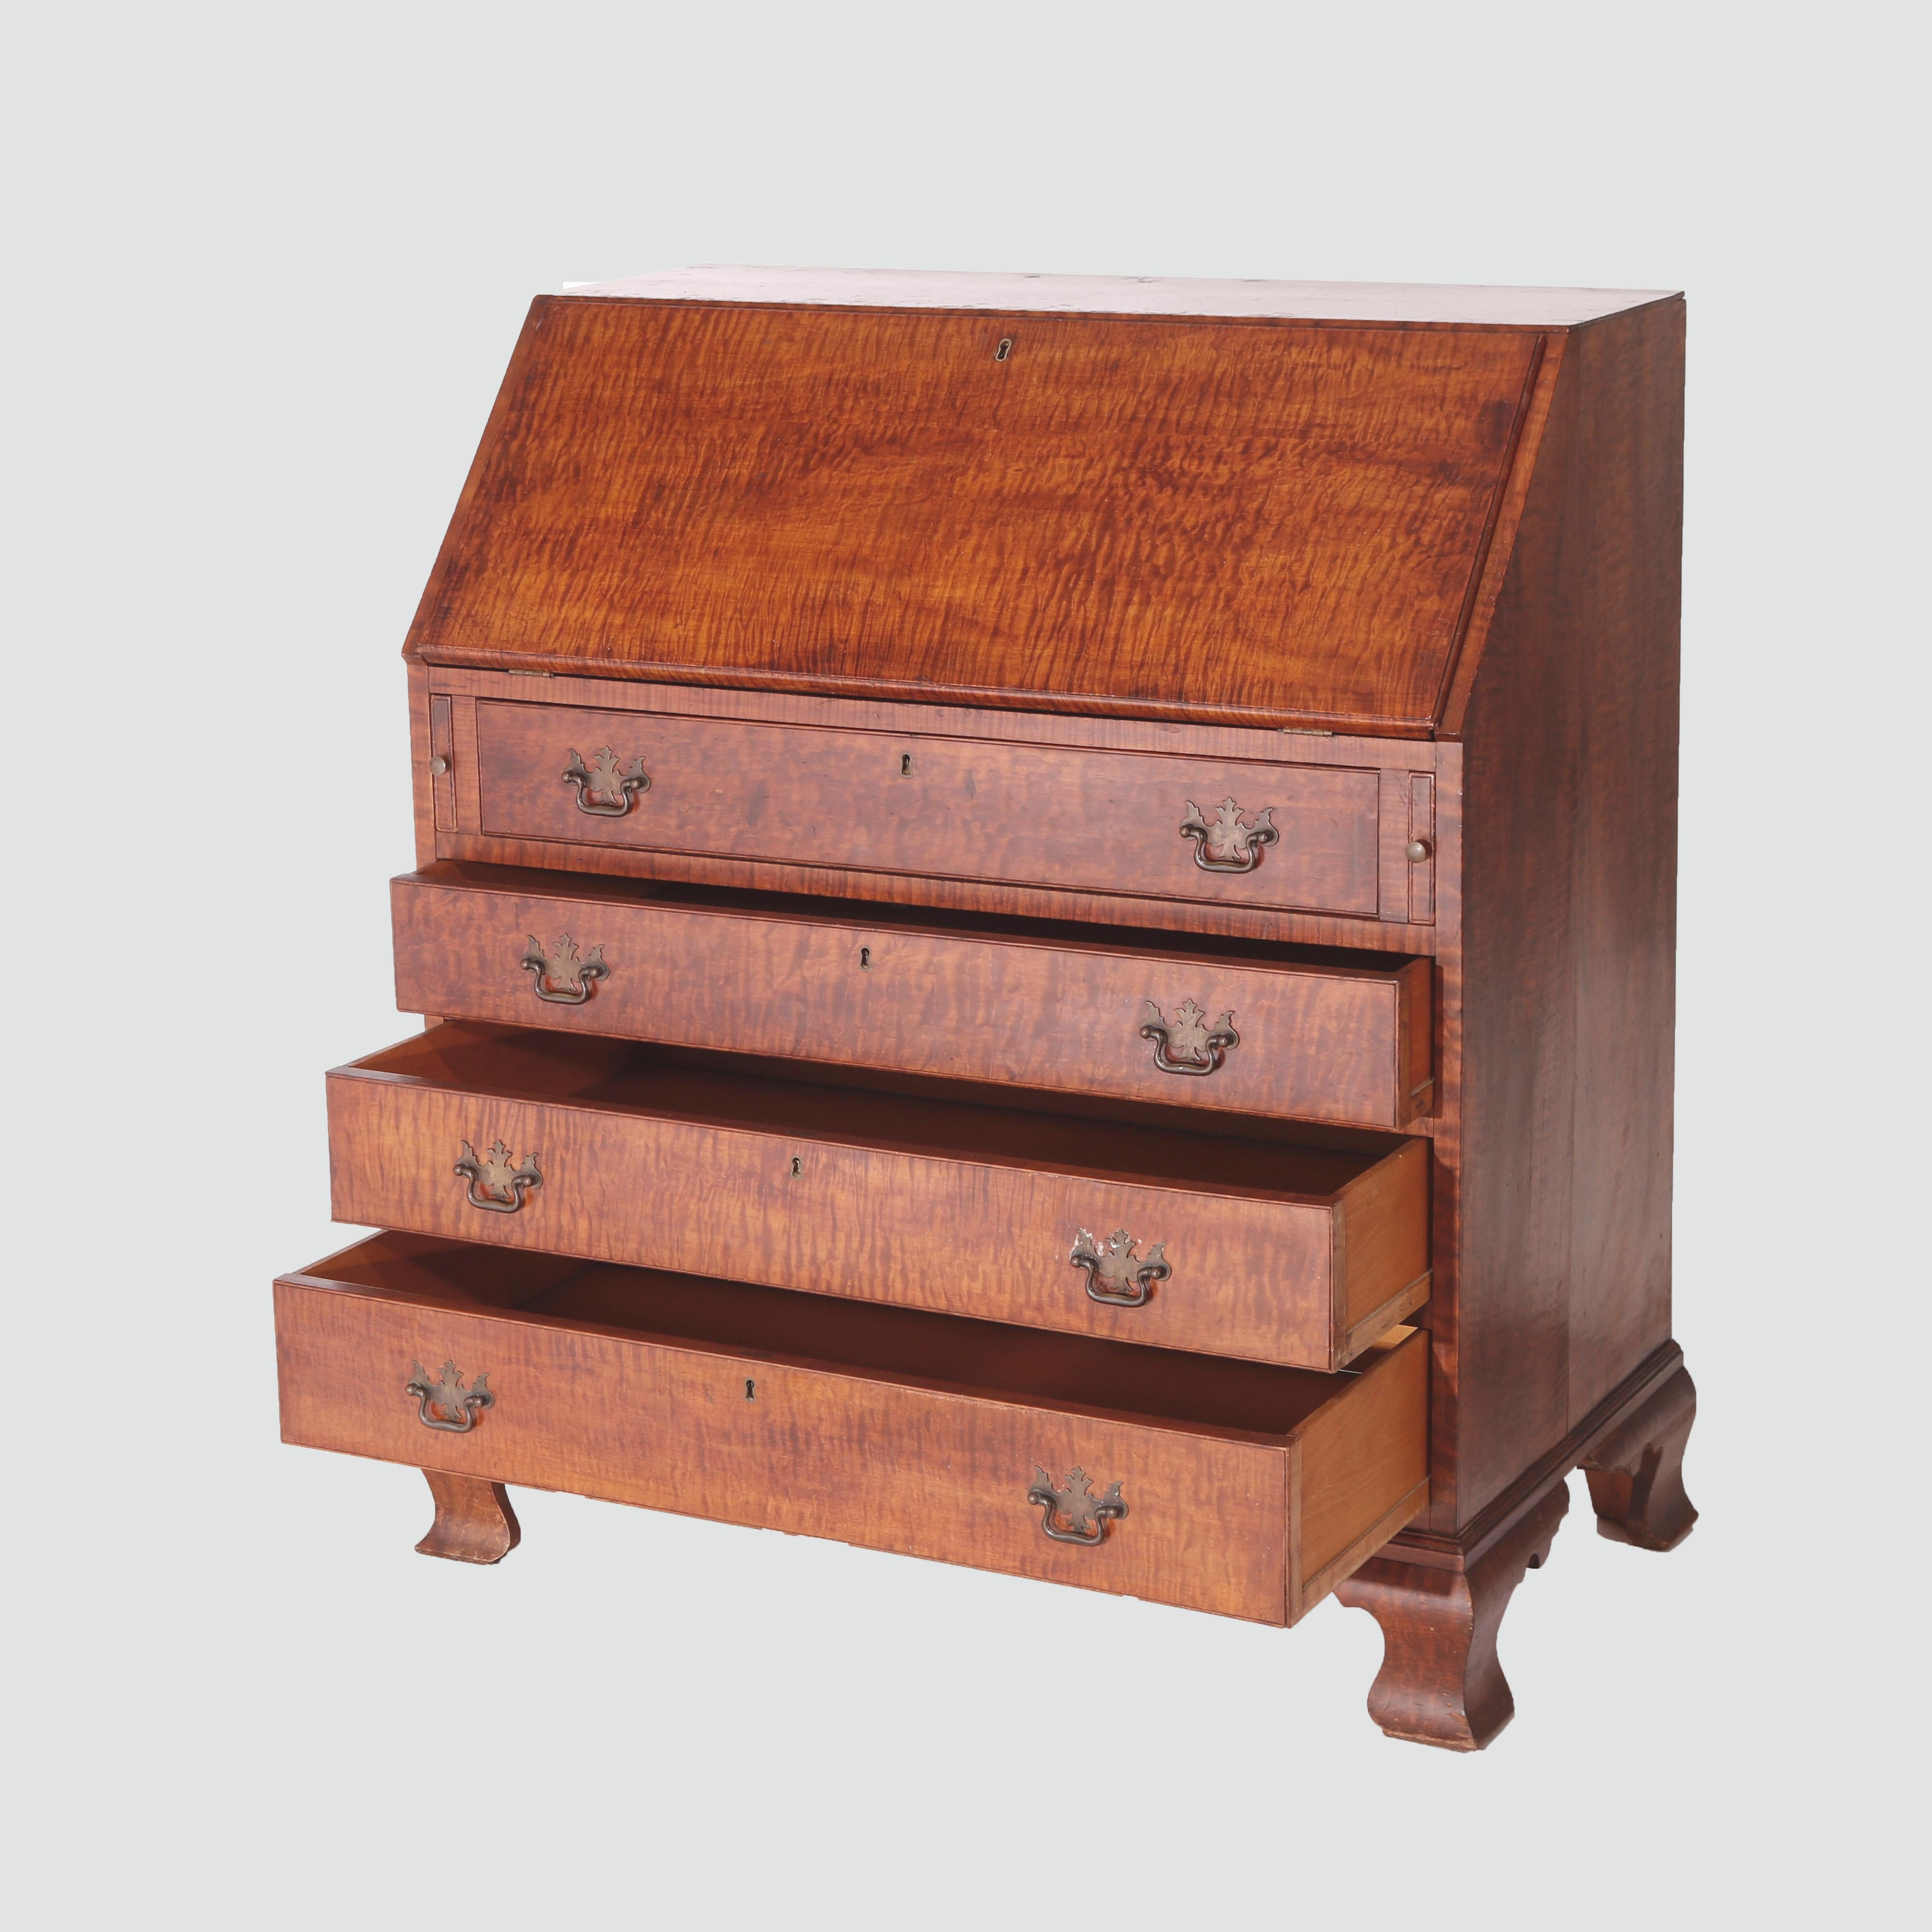 A Chippendale style secretary offers tiger maple construction with drop front desk over case having four drawers, raised on bracket feet, 20th century

Measures - 41.25